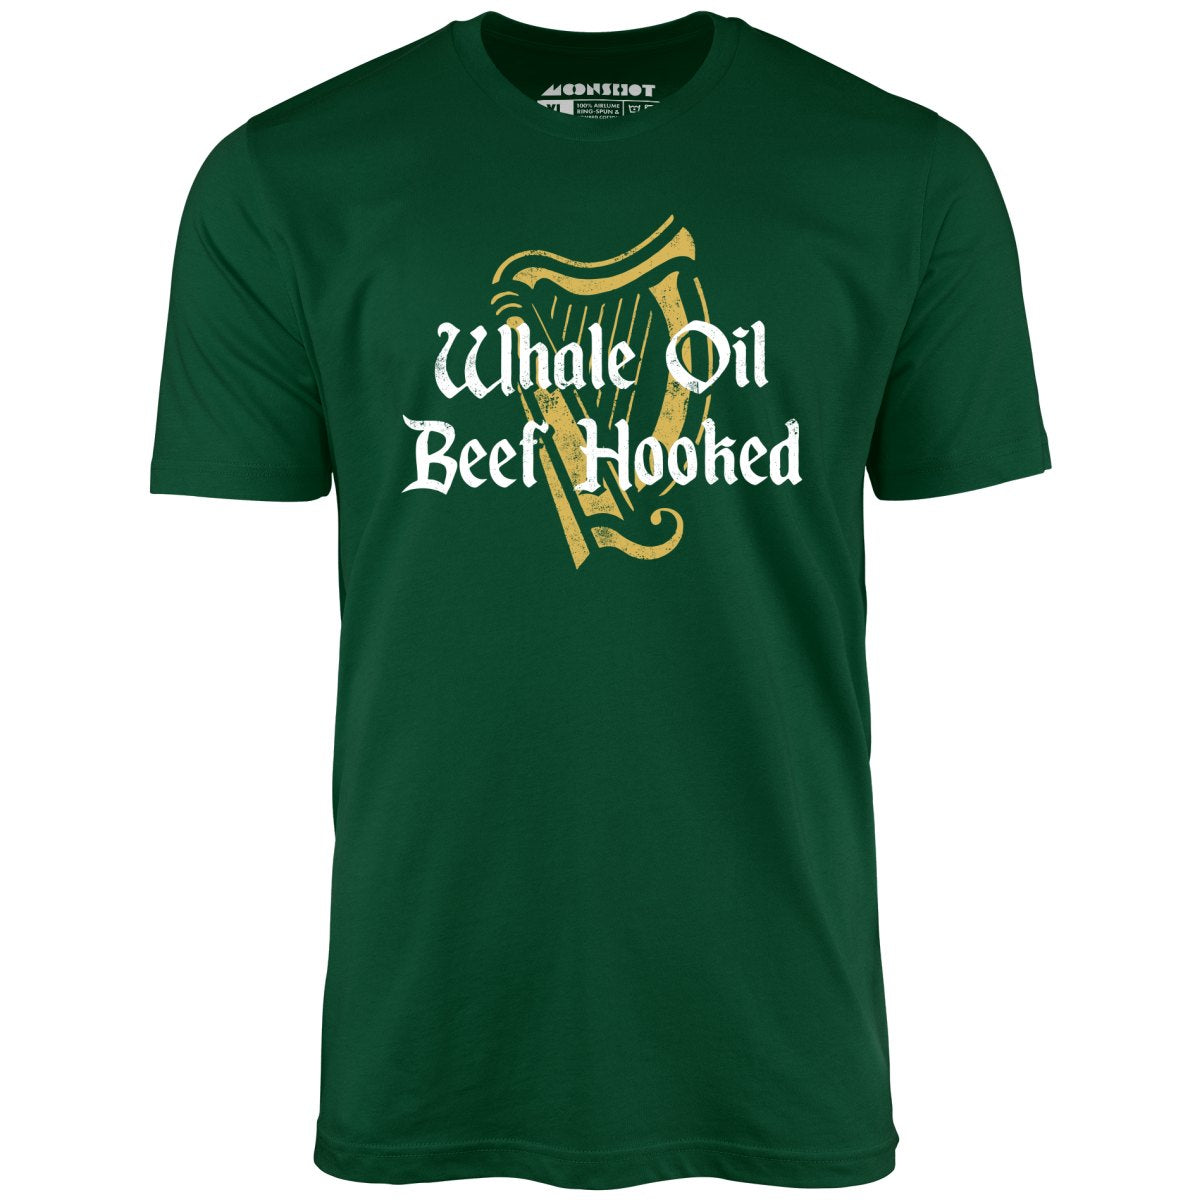 Whale Oil Beef Hooked - Unisex T-Shirt